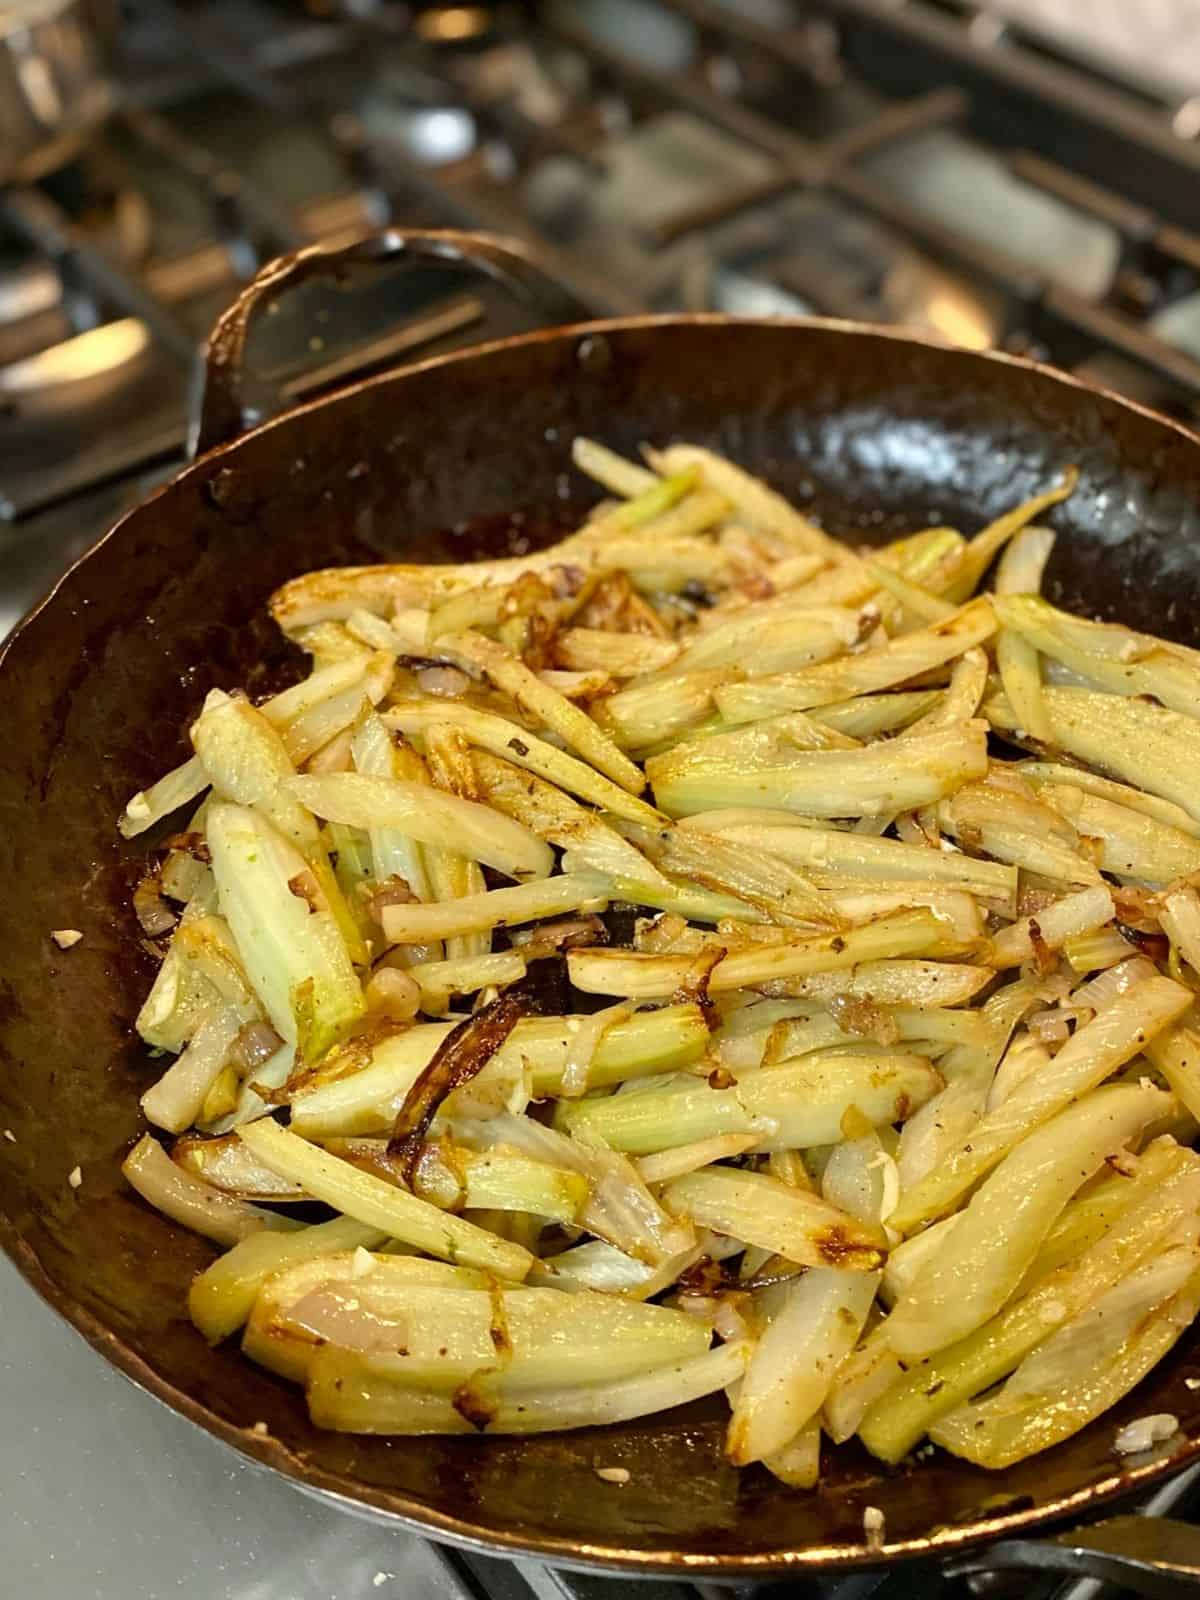 fennel and shallots cooking in pan on stove top